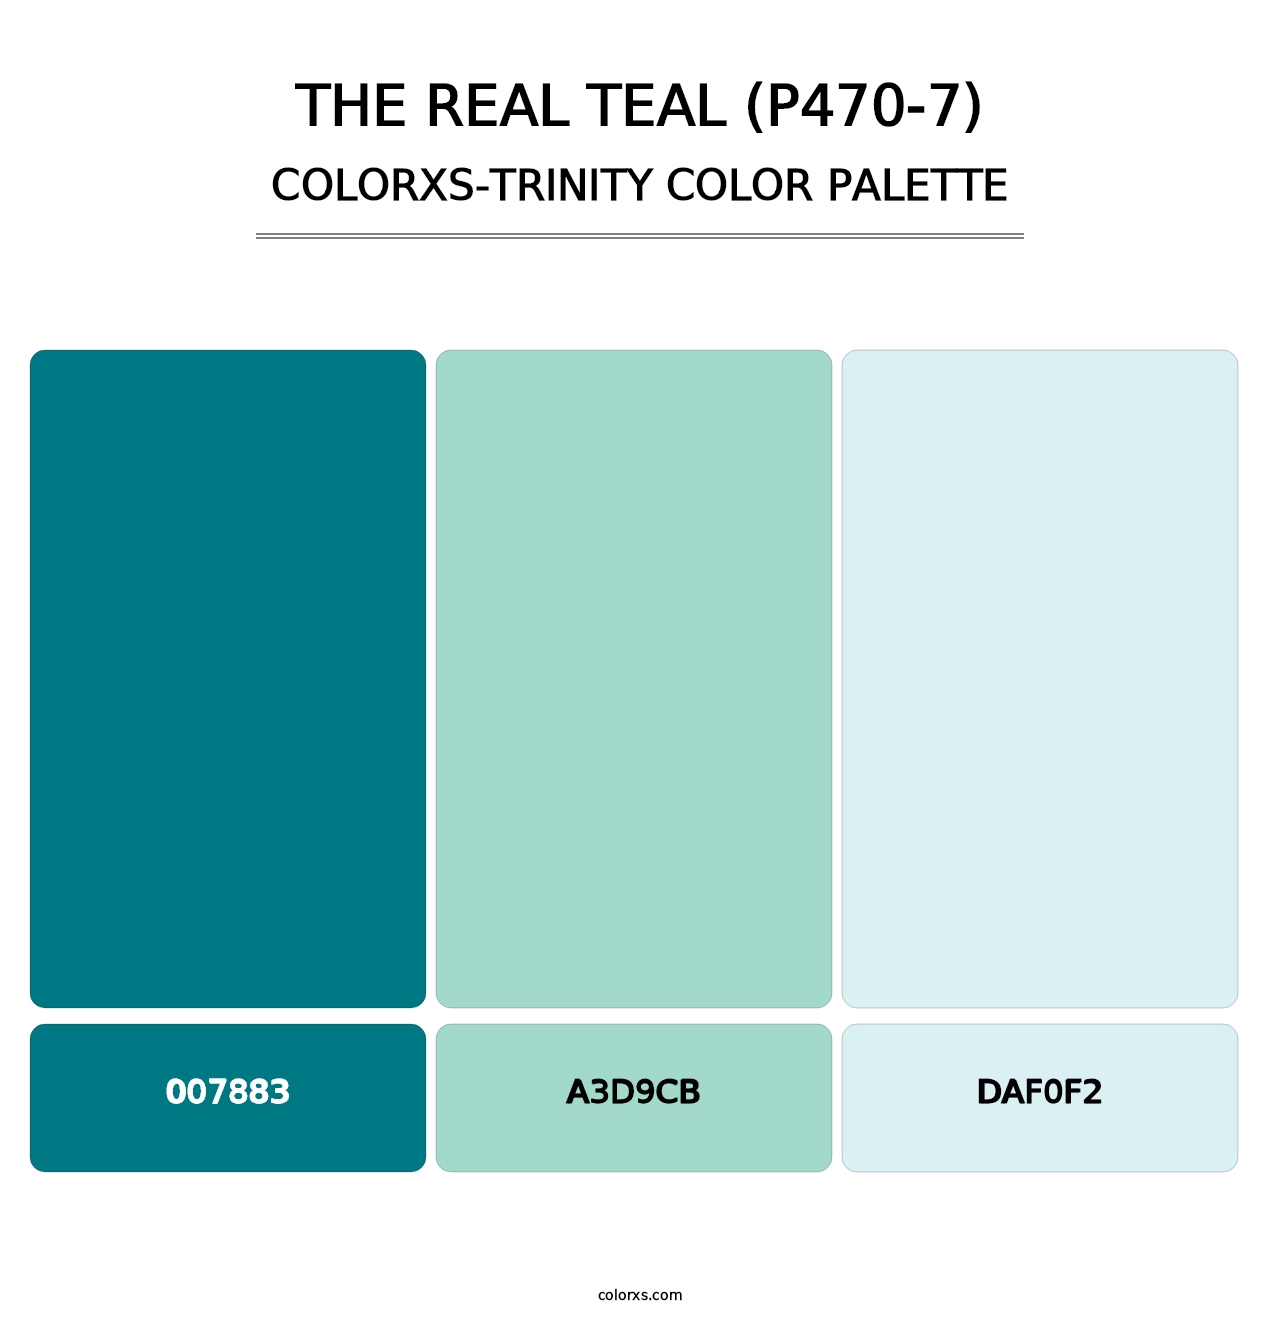 The Real Teal (P470-7) - Colorxs Trinity Palette